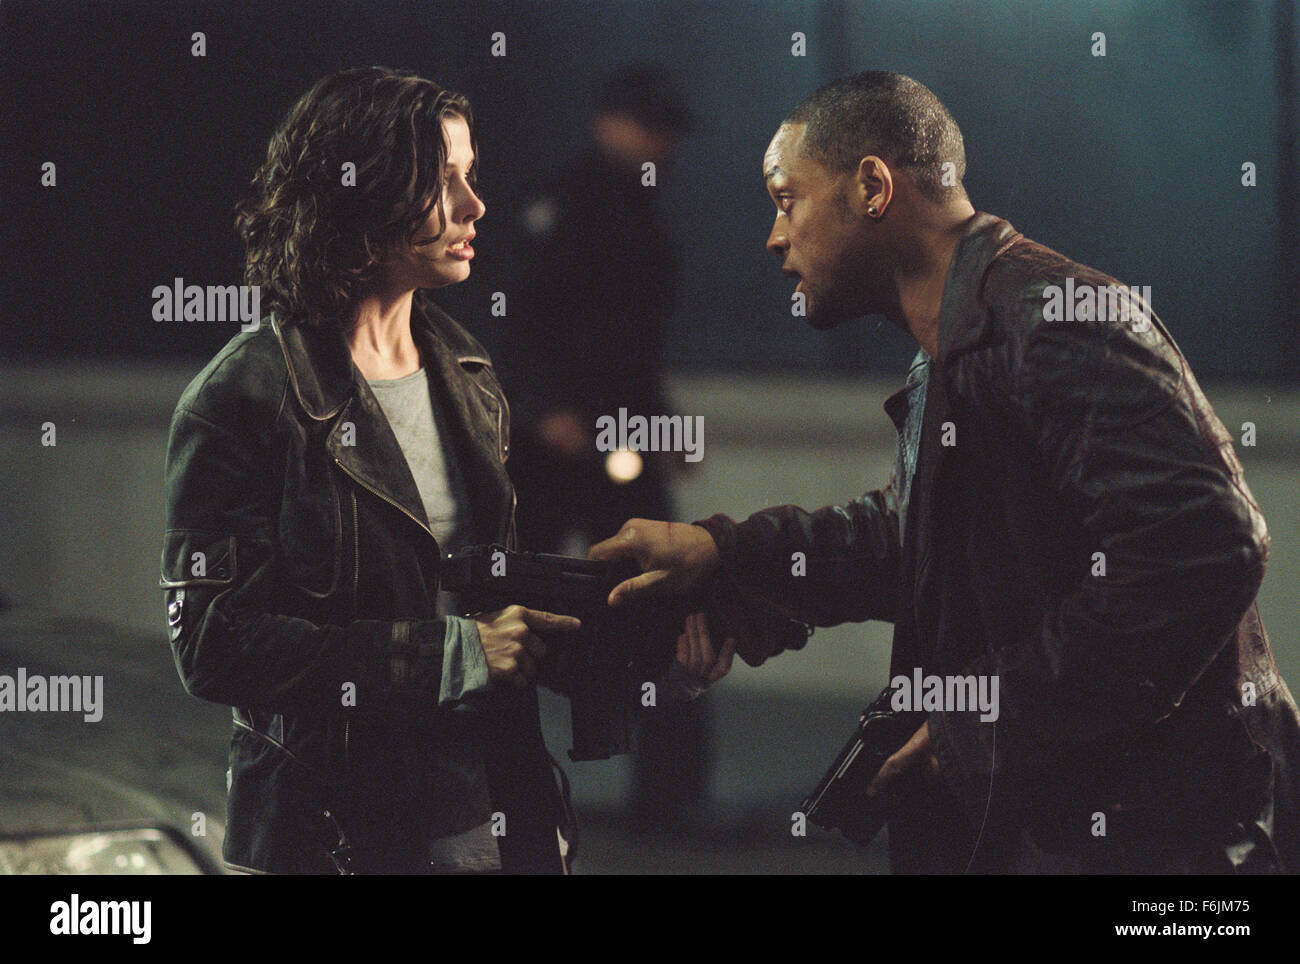 RELEASE DATE: July 16, 2004. MOVIE TITLE: I Robot. STUDIO: 20th Century Fox. PLOT: In the year 2035 a techno-phobic cop investigates a crime that may have been perpetrated by a robot, which leads to a larger threat to humanity. PICTURED: BRIDGET MOYNAHAN as Susan and WILL SMITH as Del Spooner. Stock Photo